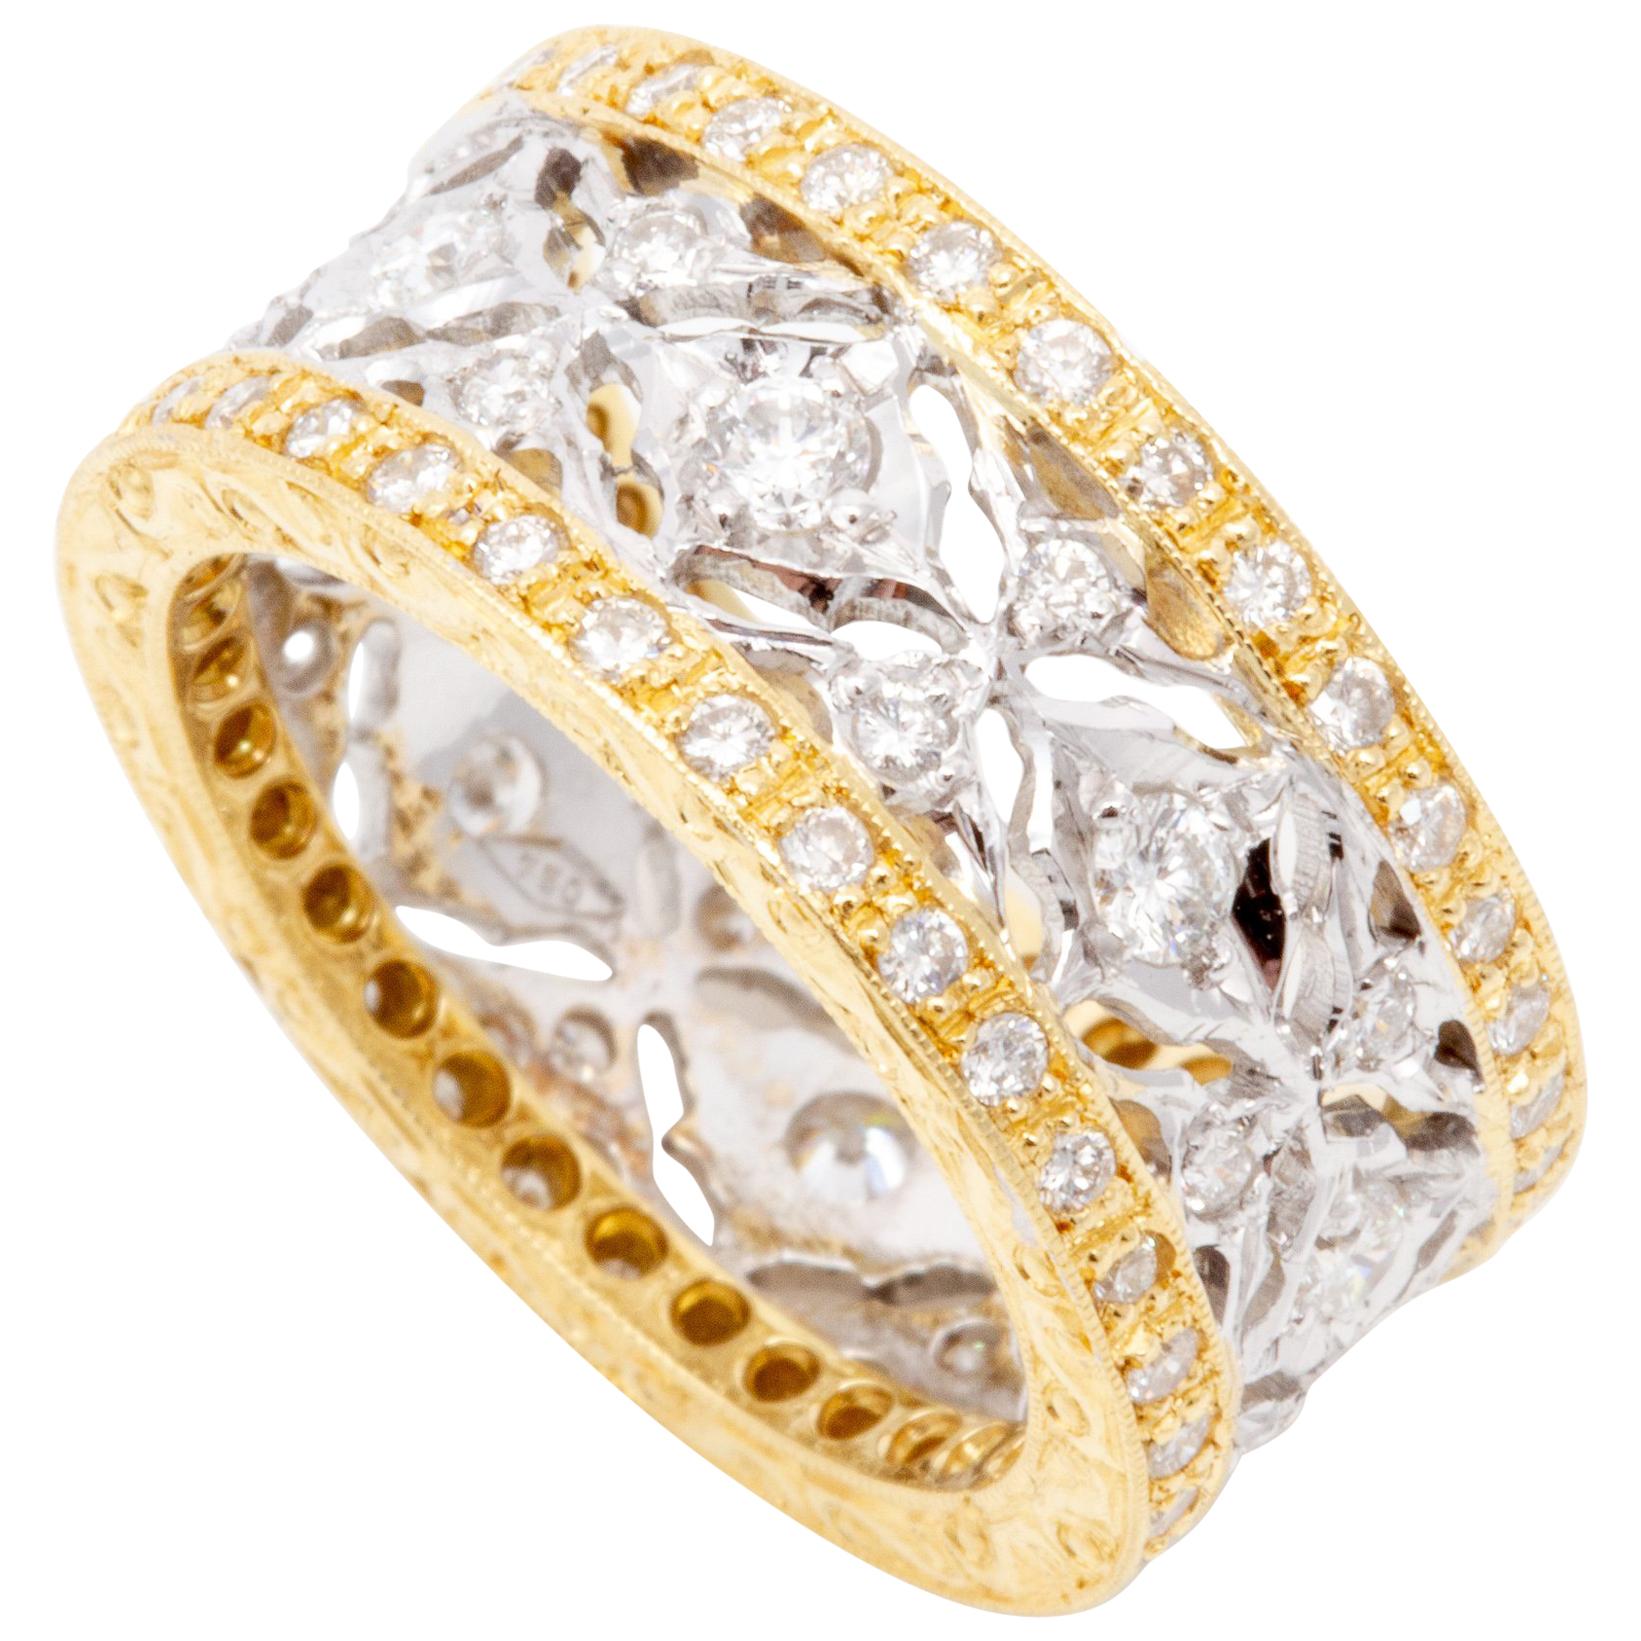 Hand-Engraved Two-Tone 18 Karat Gold and Diamond Ring